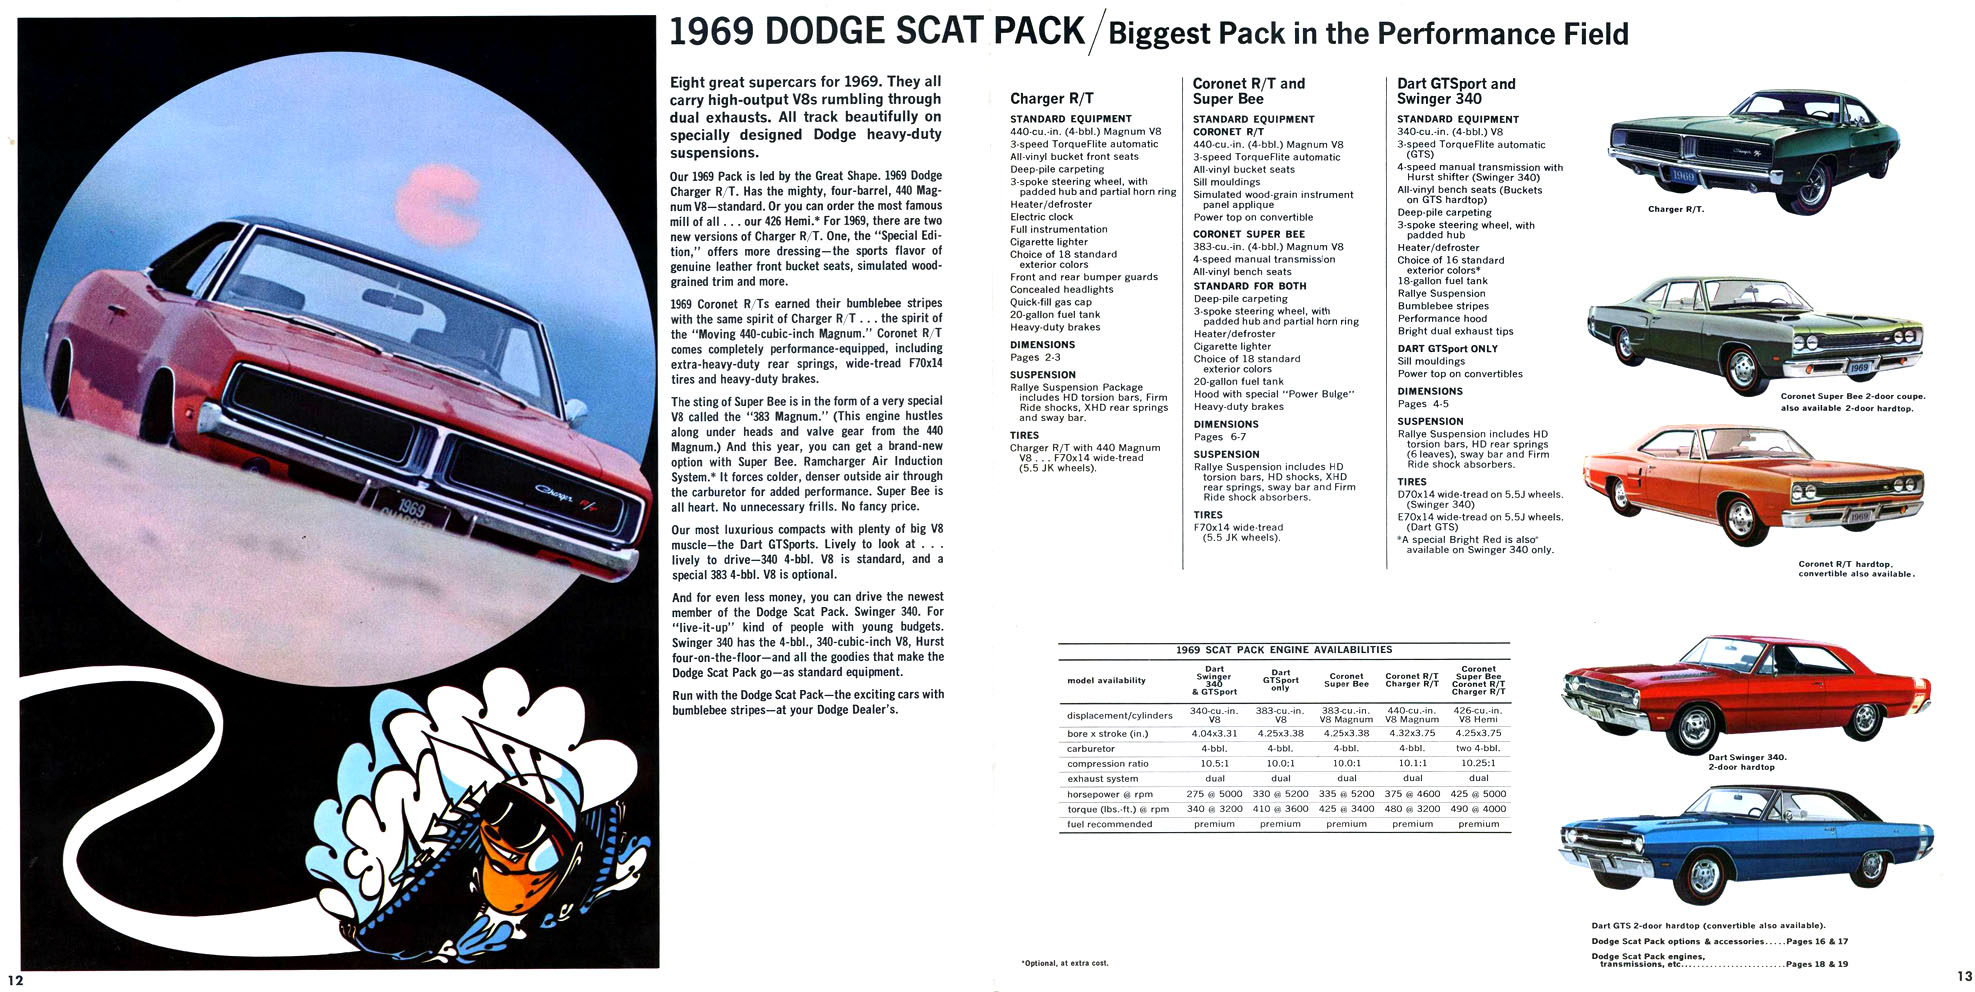 1969 Dodge Scat Pack Advertisement – “Biggest Pack In The Performance Field”